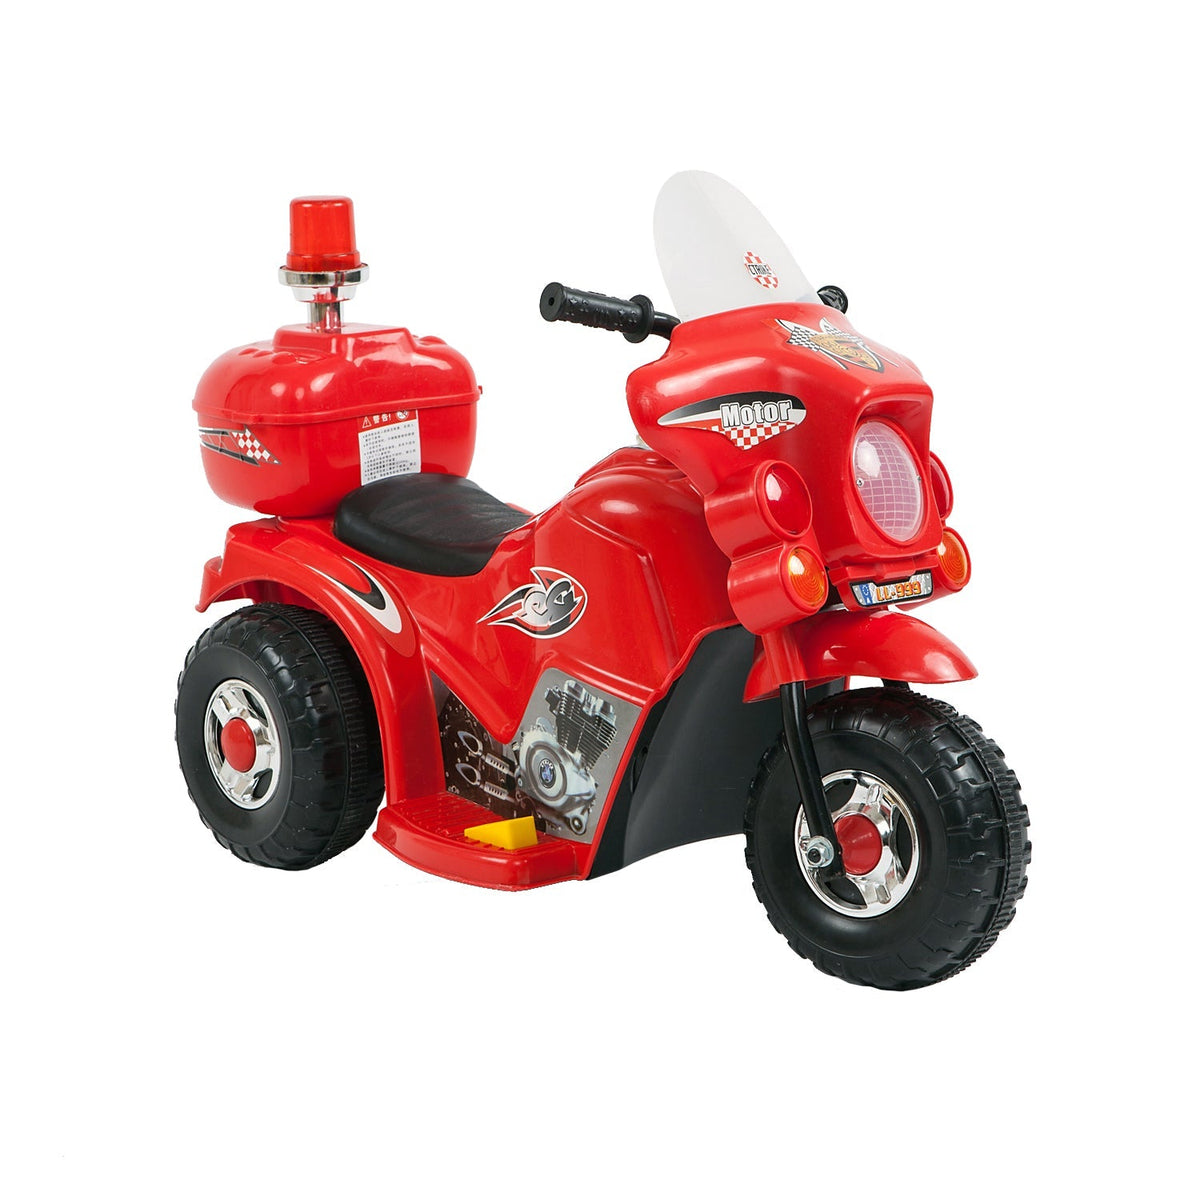 Angle view of the red Children's Electric Ride-on Motorcycle.